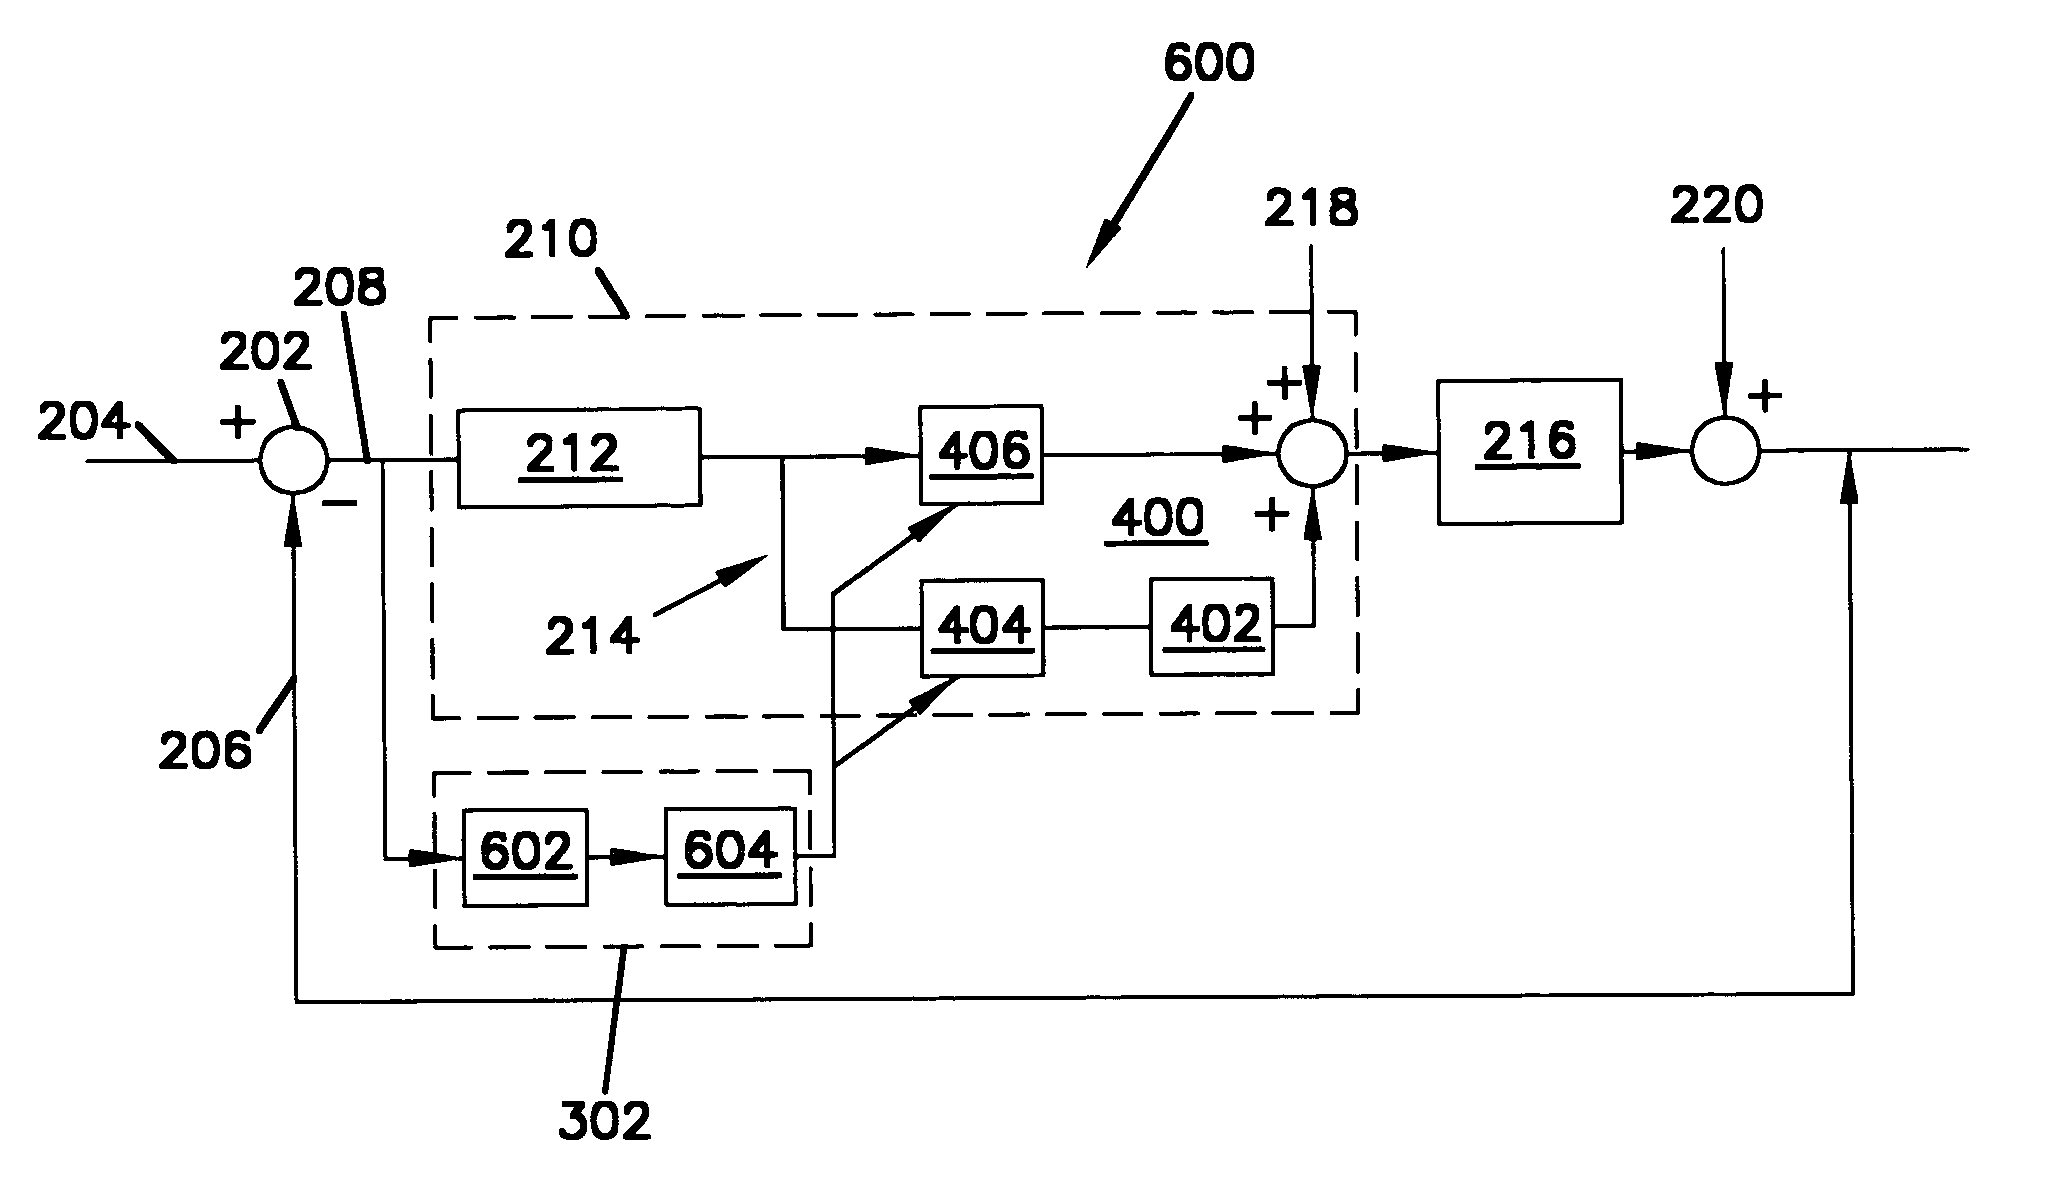 Real-time automatic loop-shaping for a disc drive servo control system